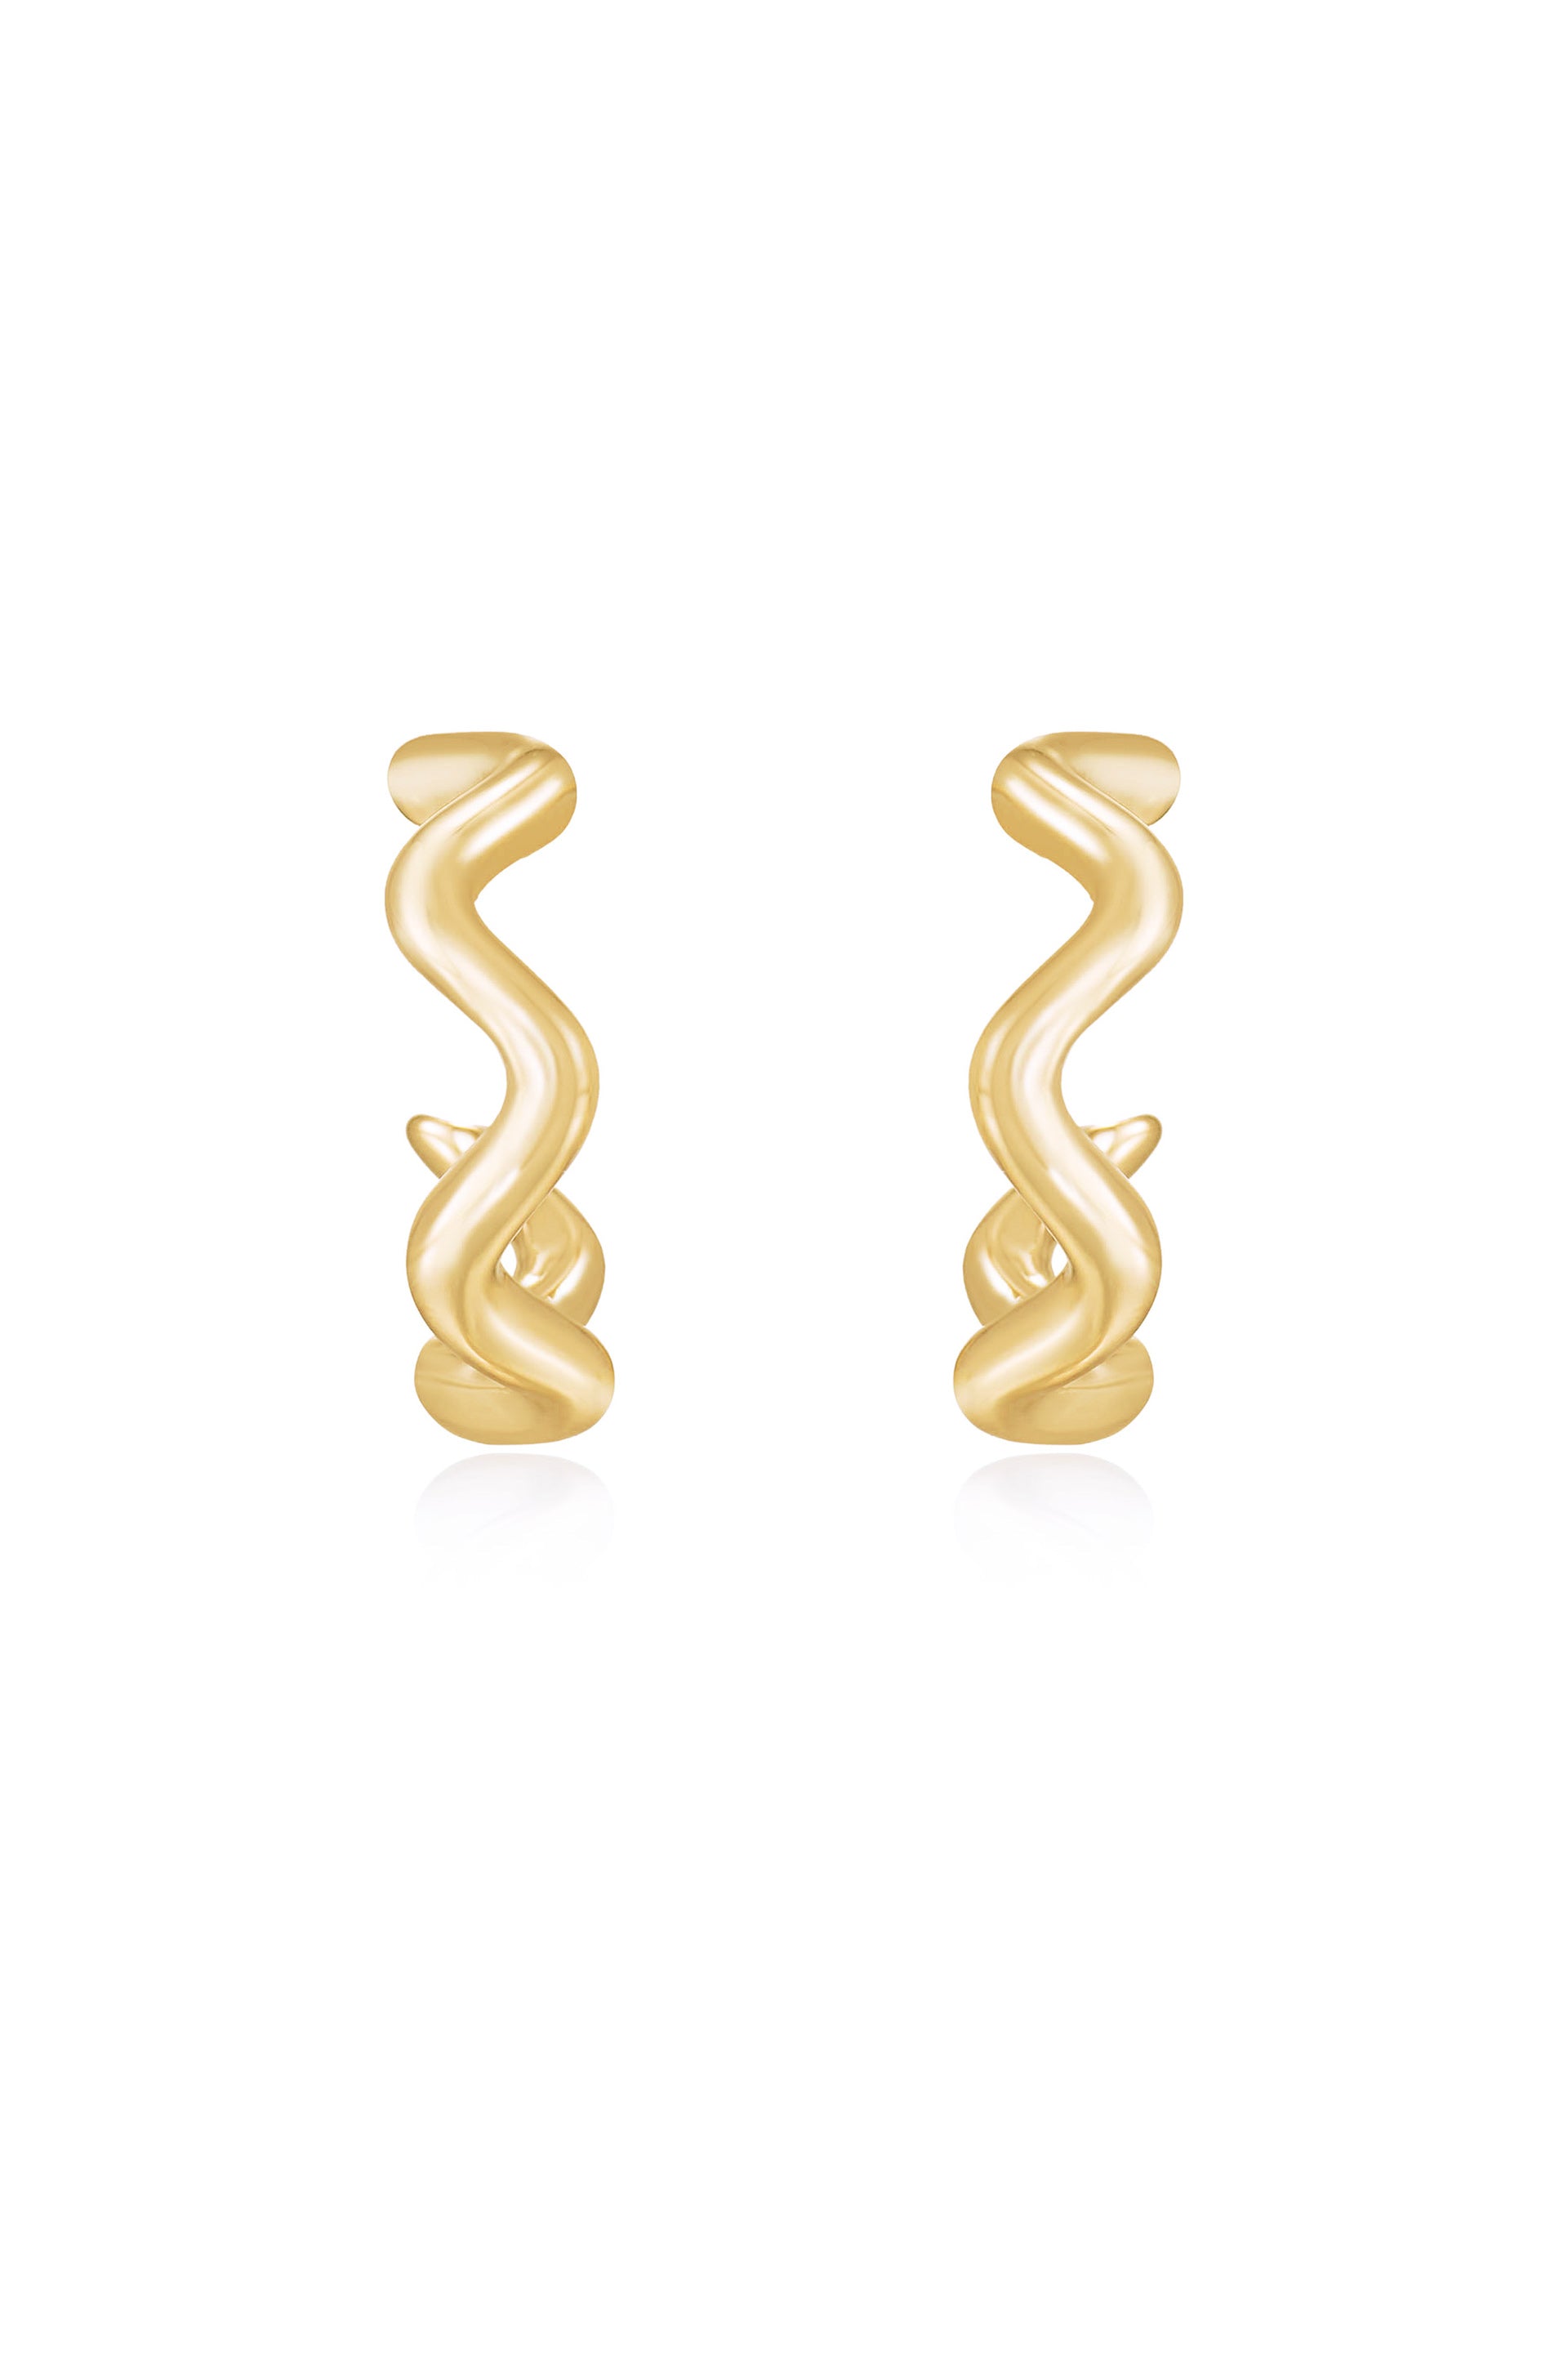 Only An Illusion Wavy 18k Gold Plated Hoop Earrings front